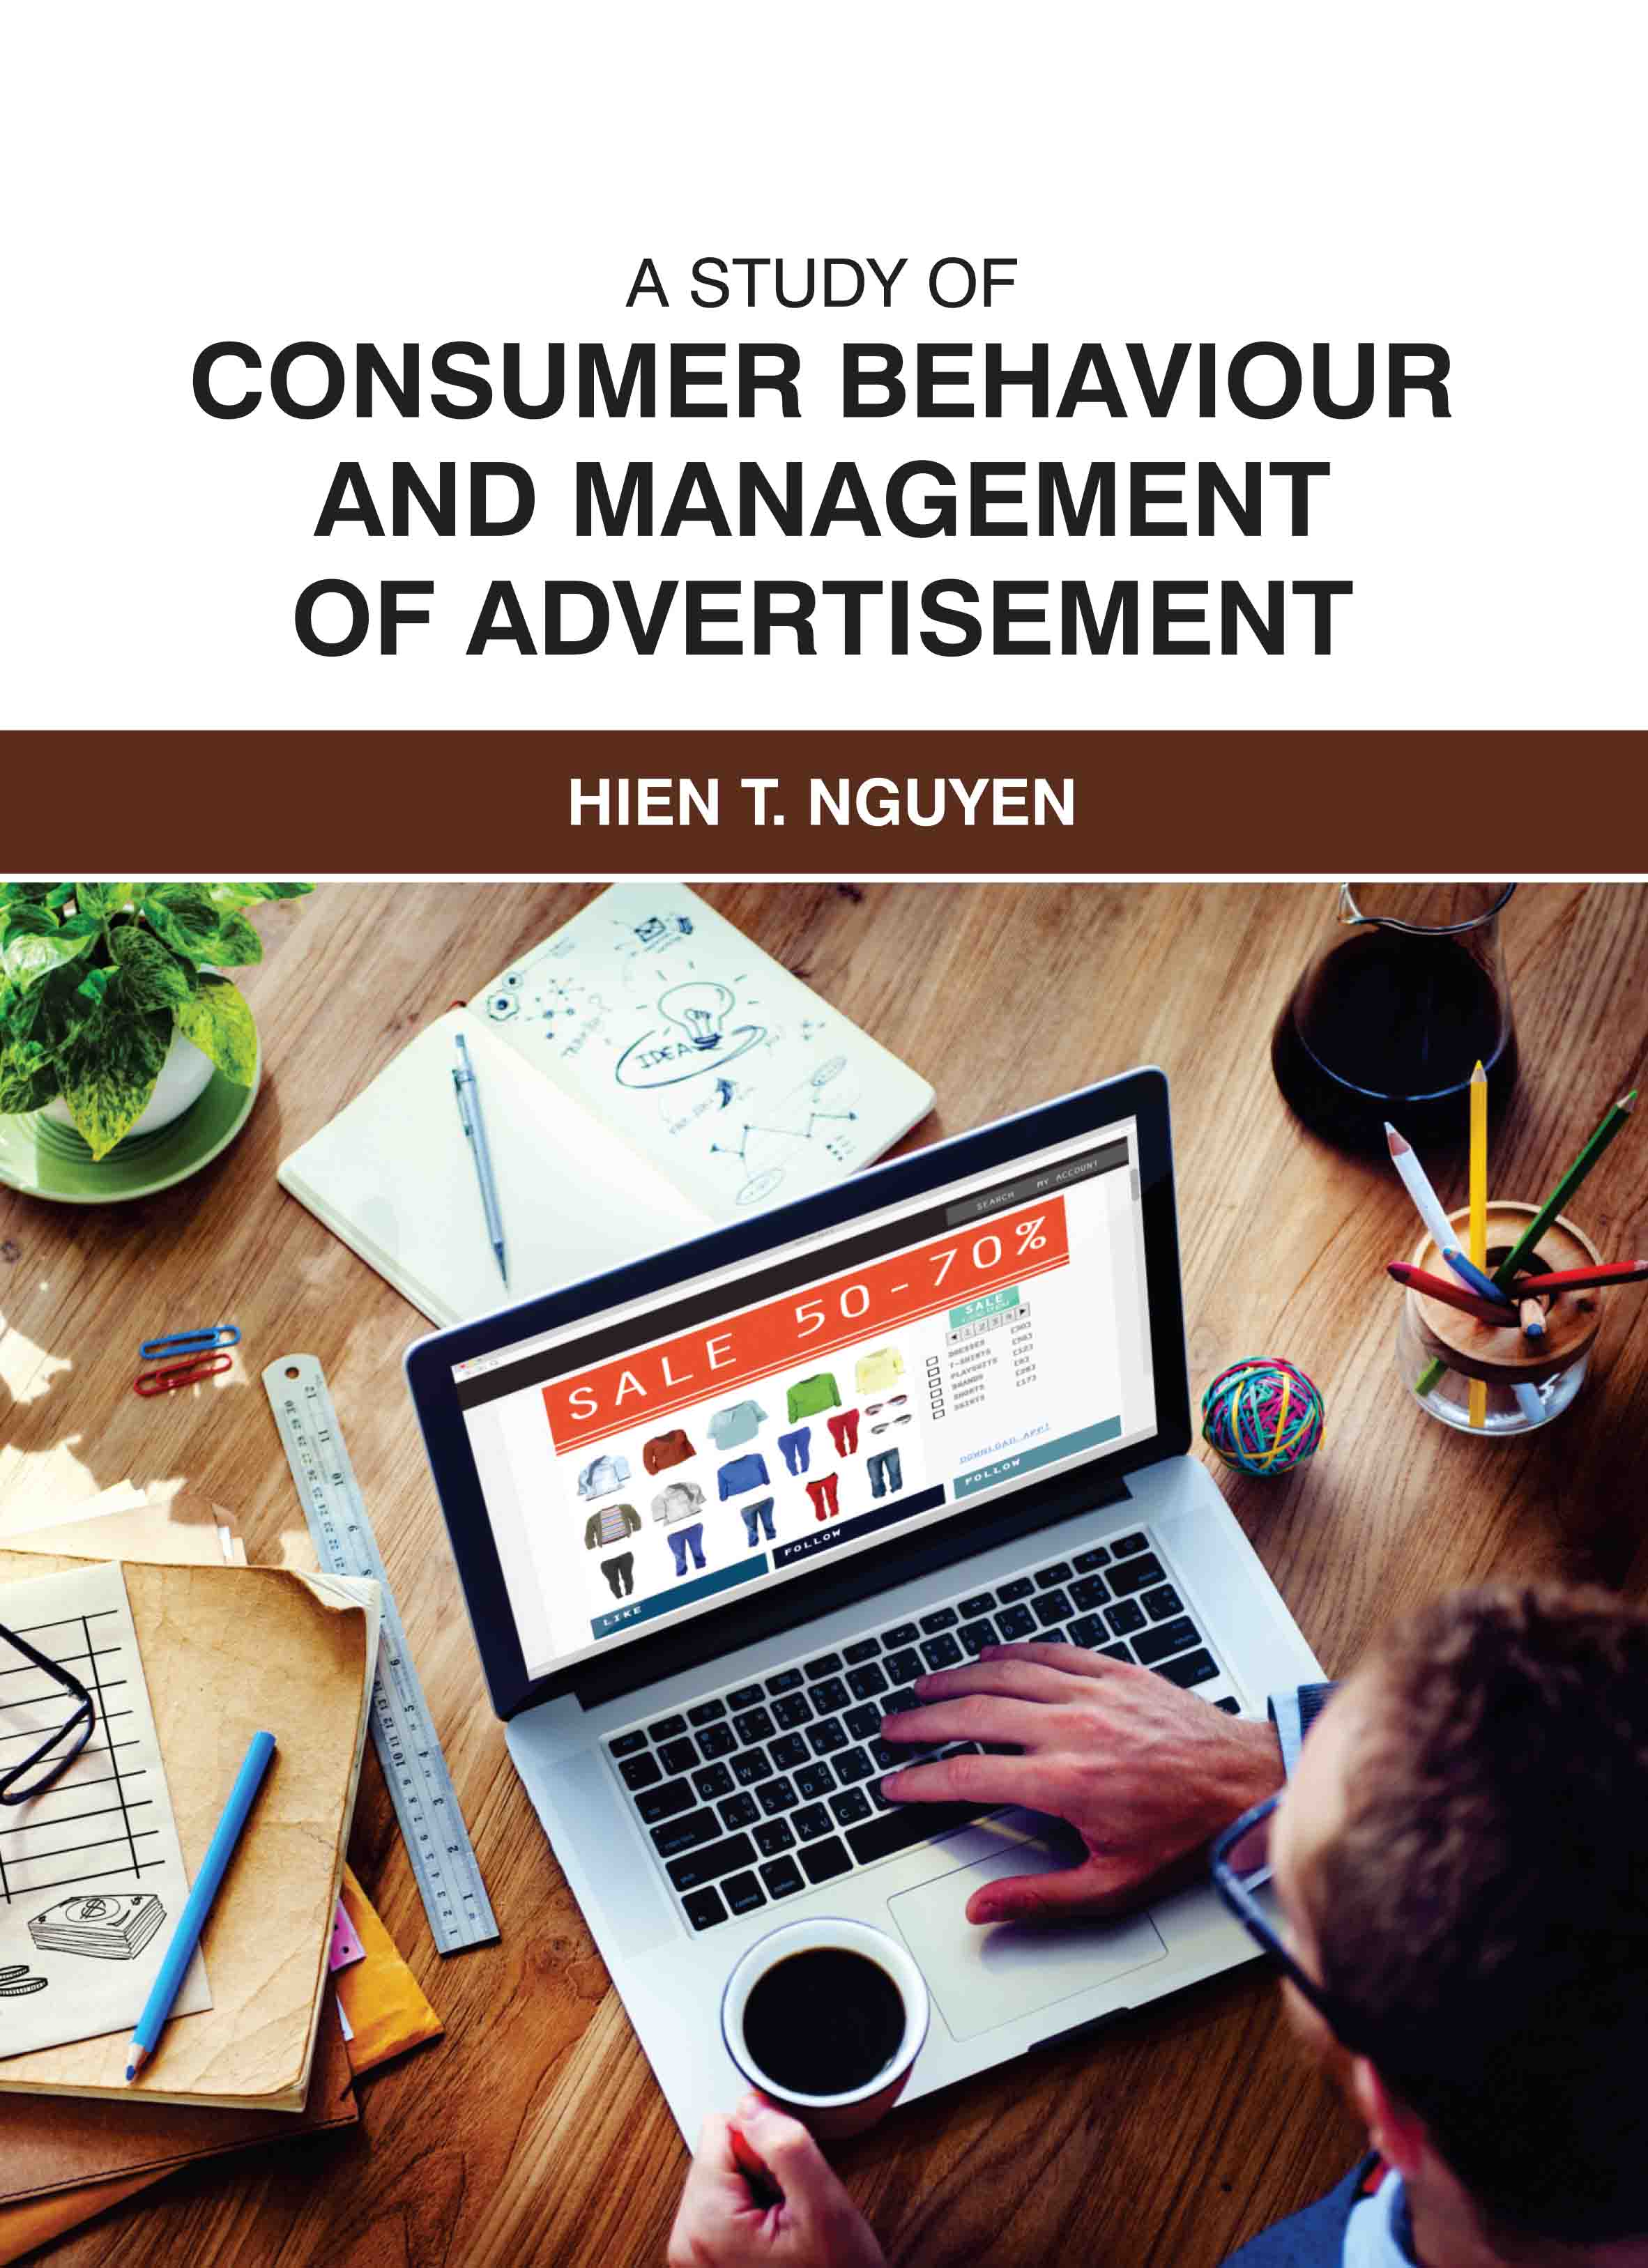 A Study of Consumer Behaviour and Management of Advertisement